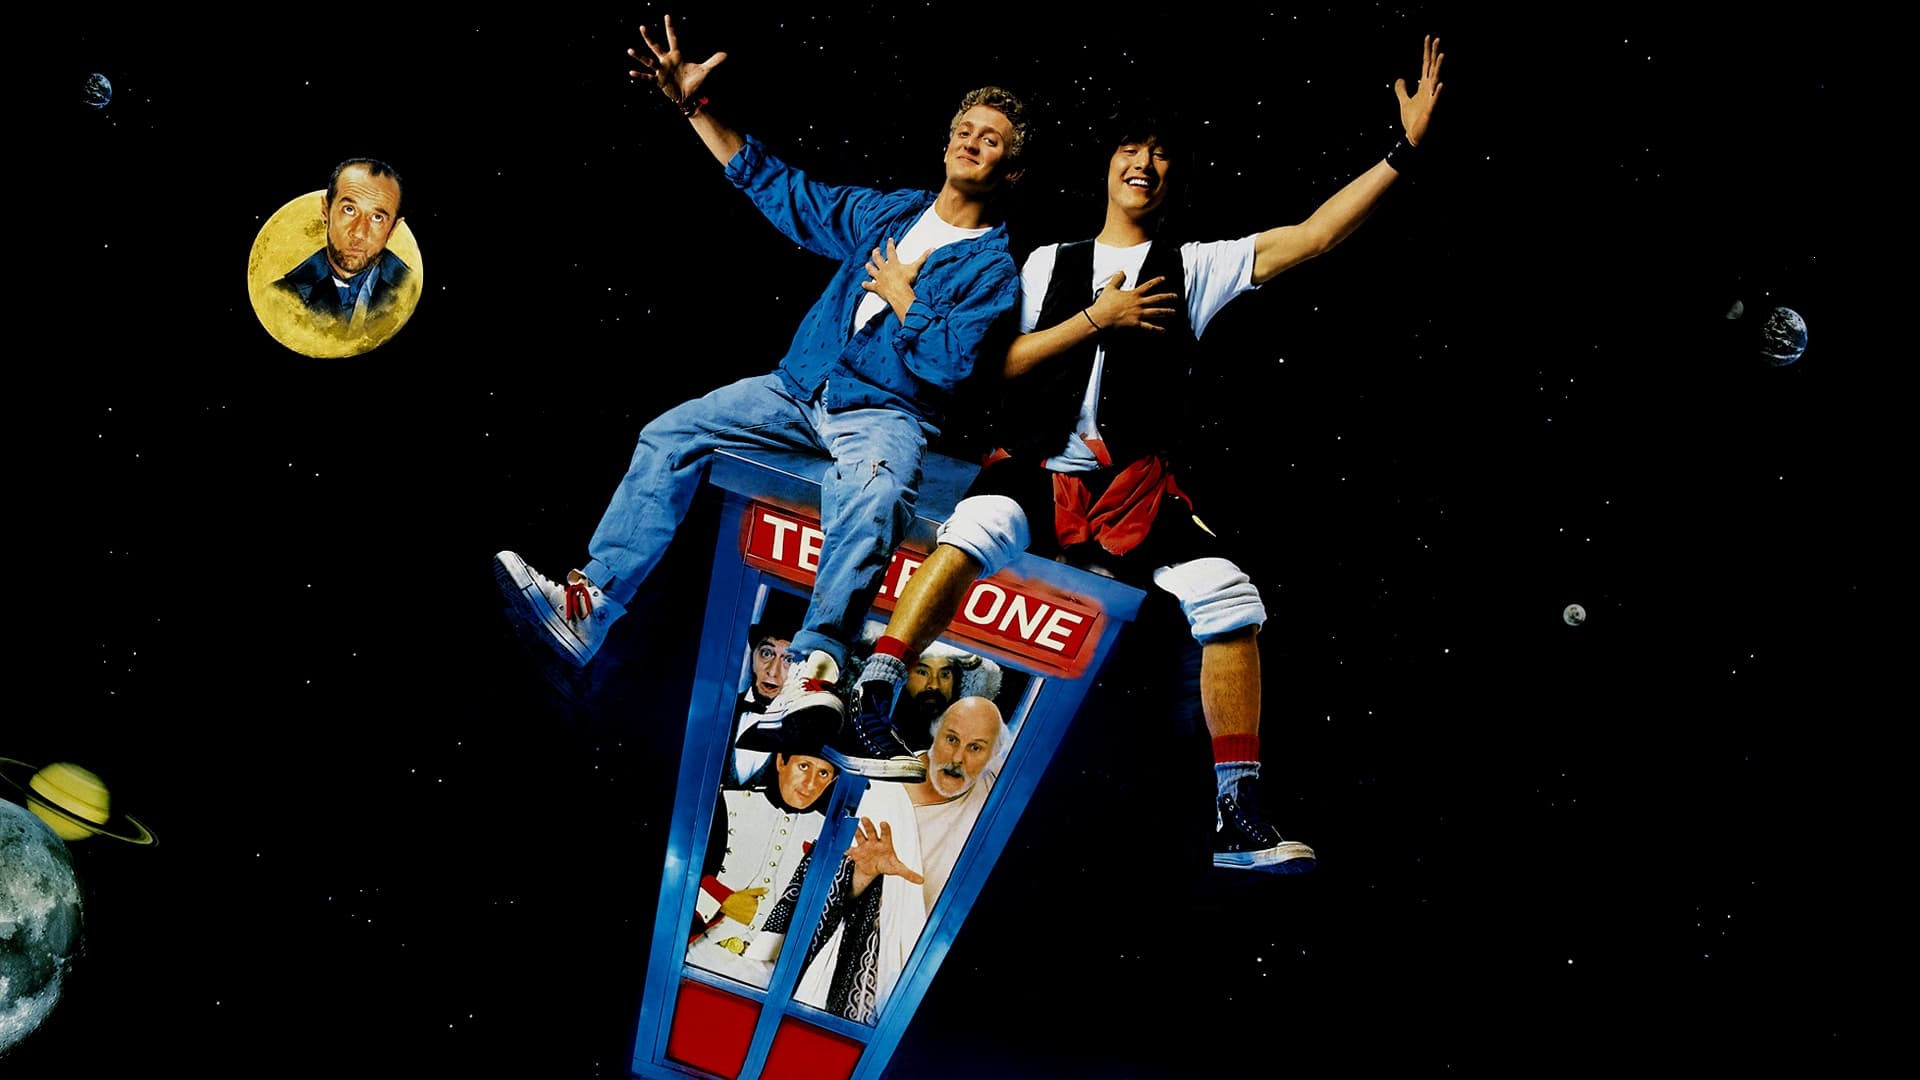 Bill & Ted 4 (1970)